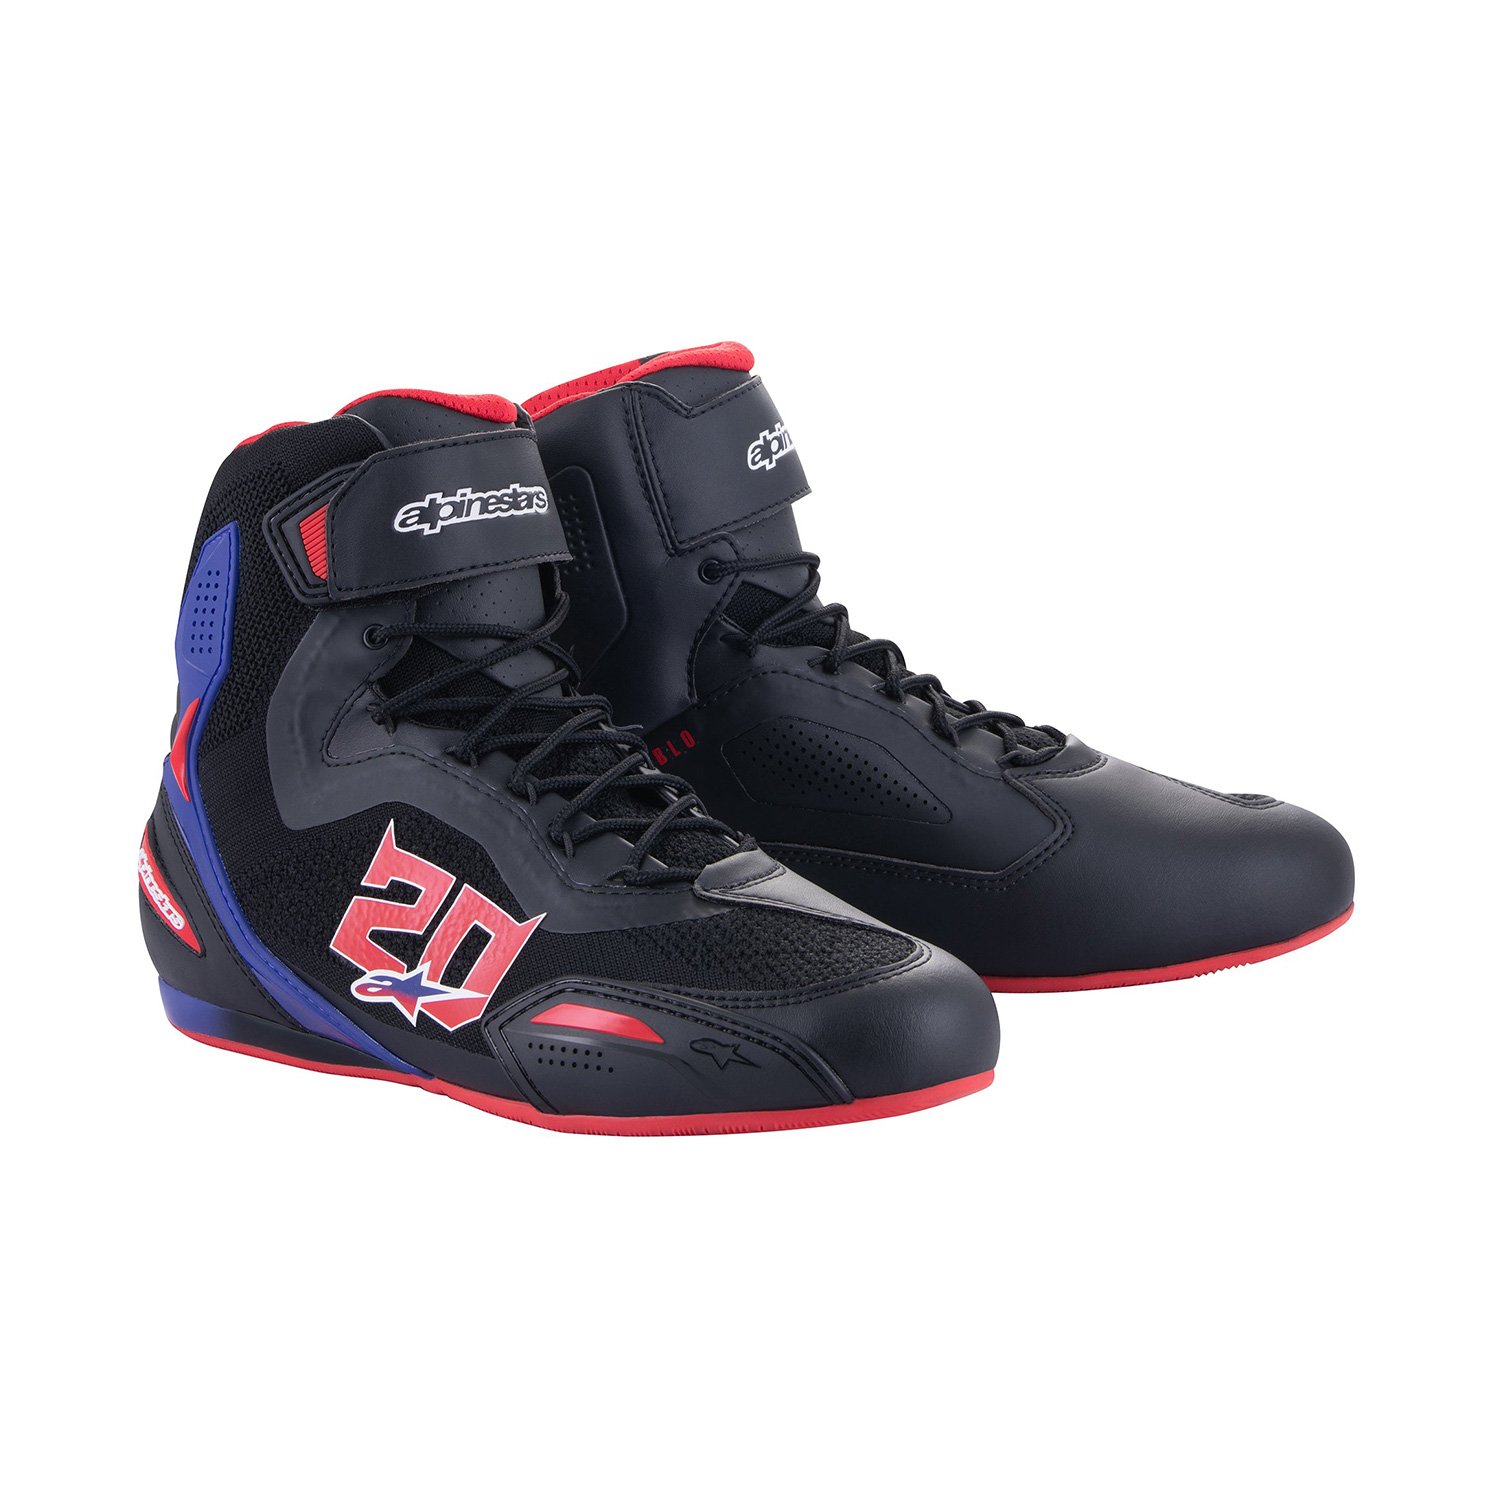 Image of EU Alpinestars FQ20 Faster-3 Rideknit Noir Bright Rouge Bleu Chaussures Taille US 75